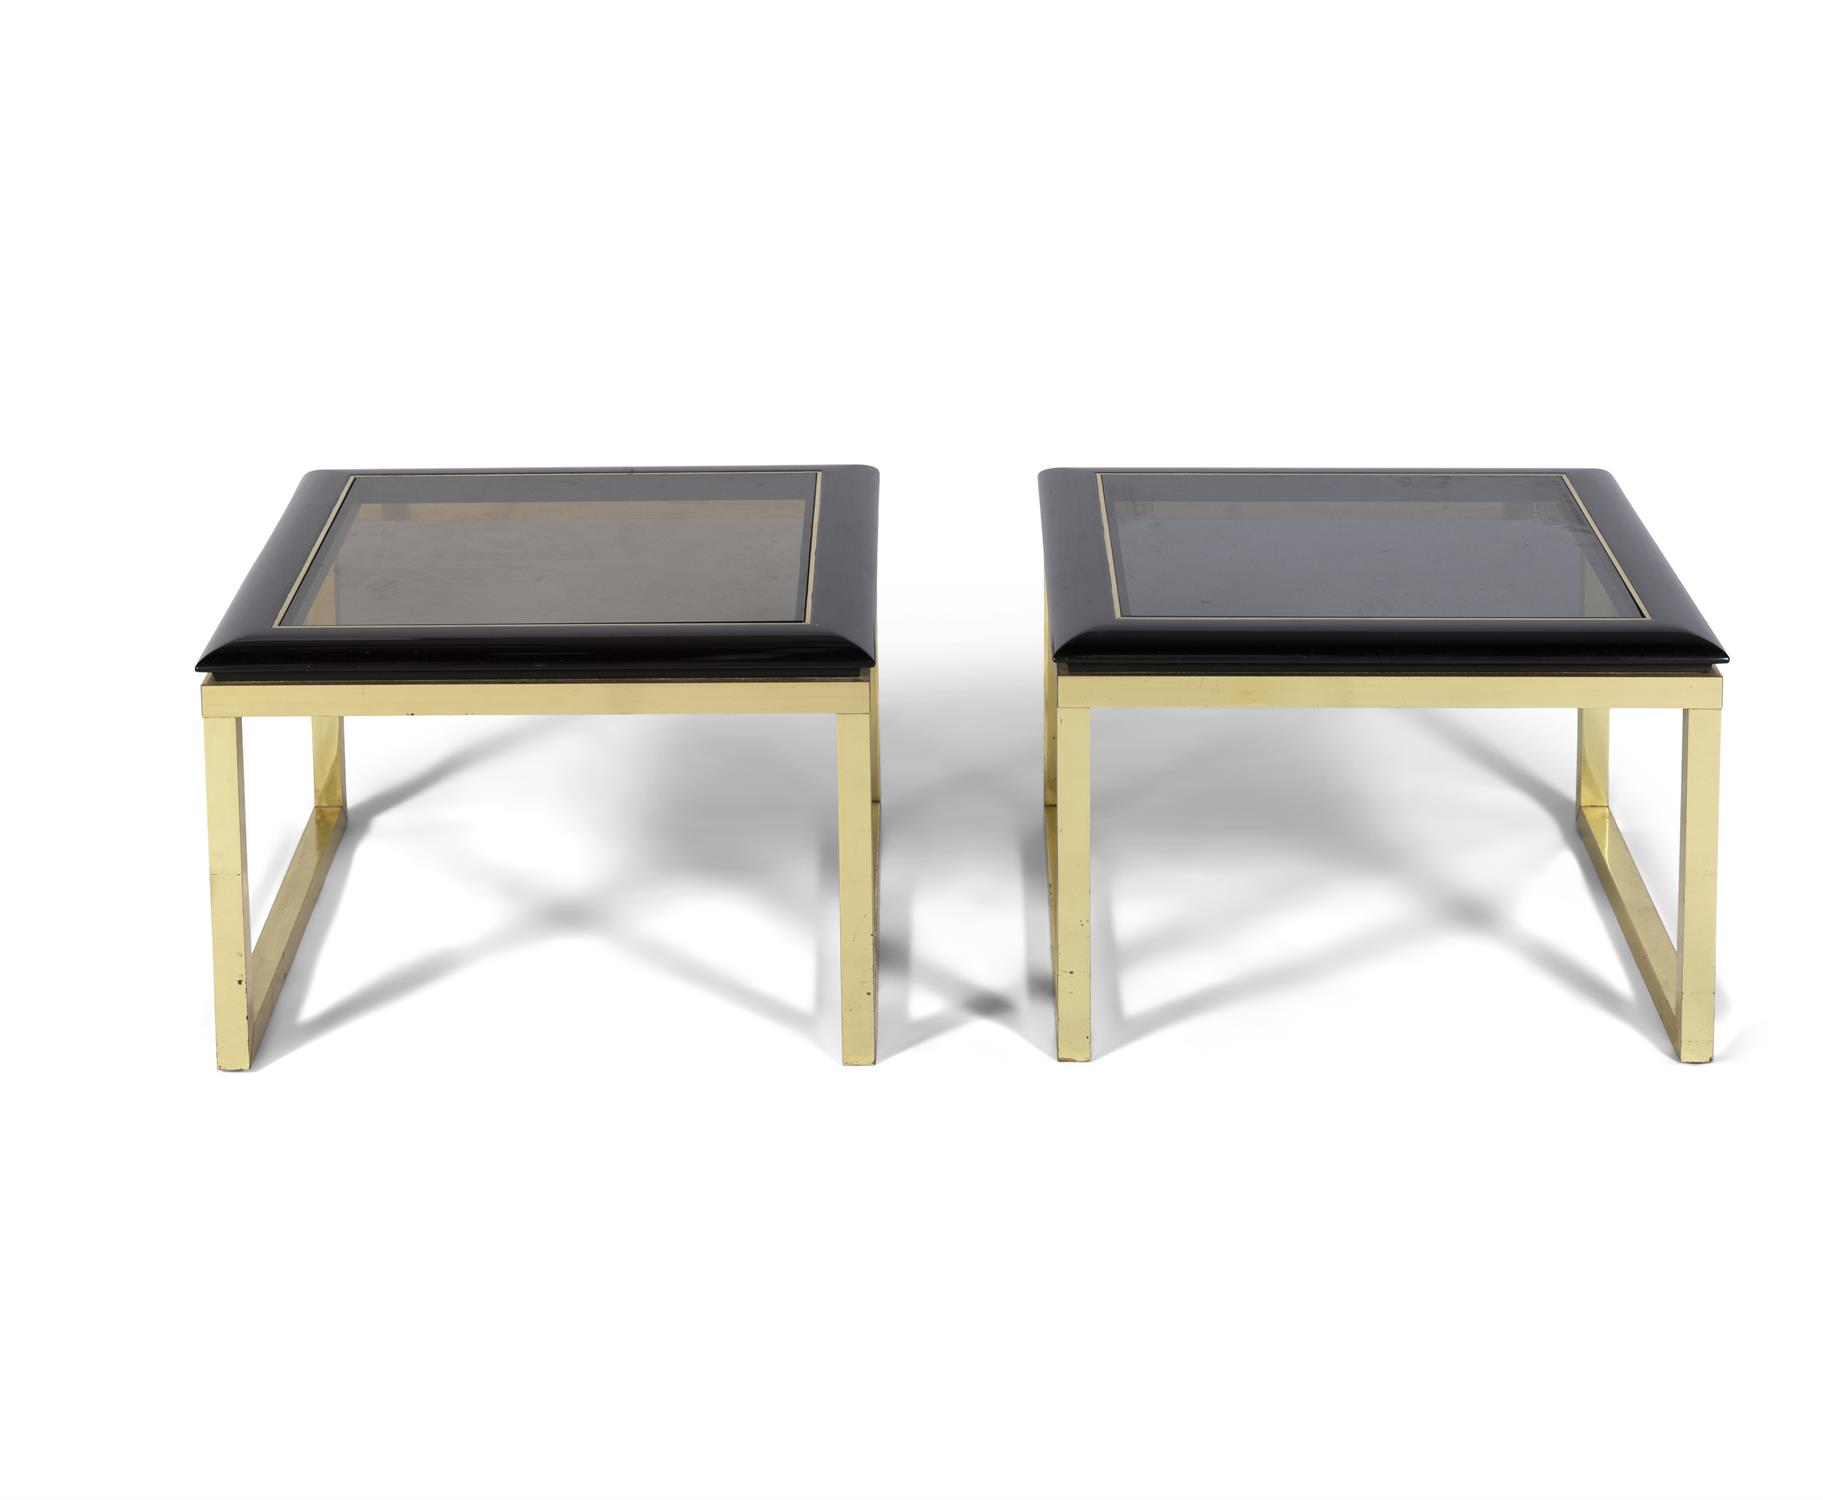 SIDE TABLES A pair of gilt metal side tables with glass tops. Italy, c.1970. 61 x 61 x 41cm(h) - Image 2 of 4